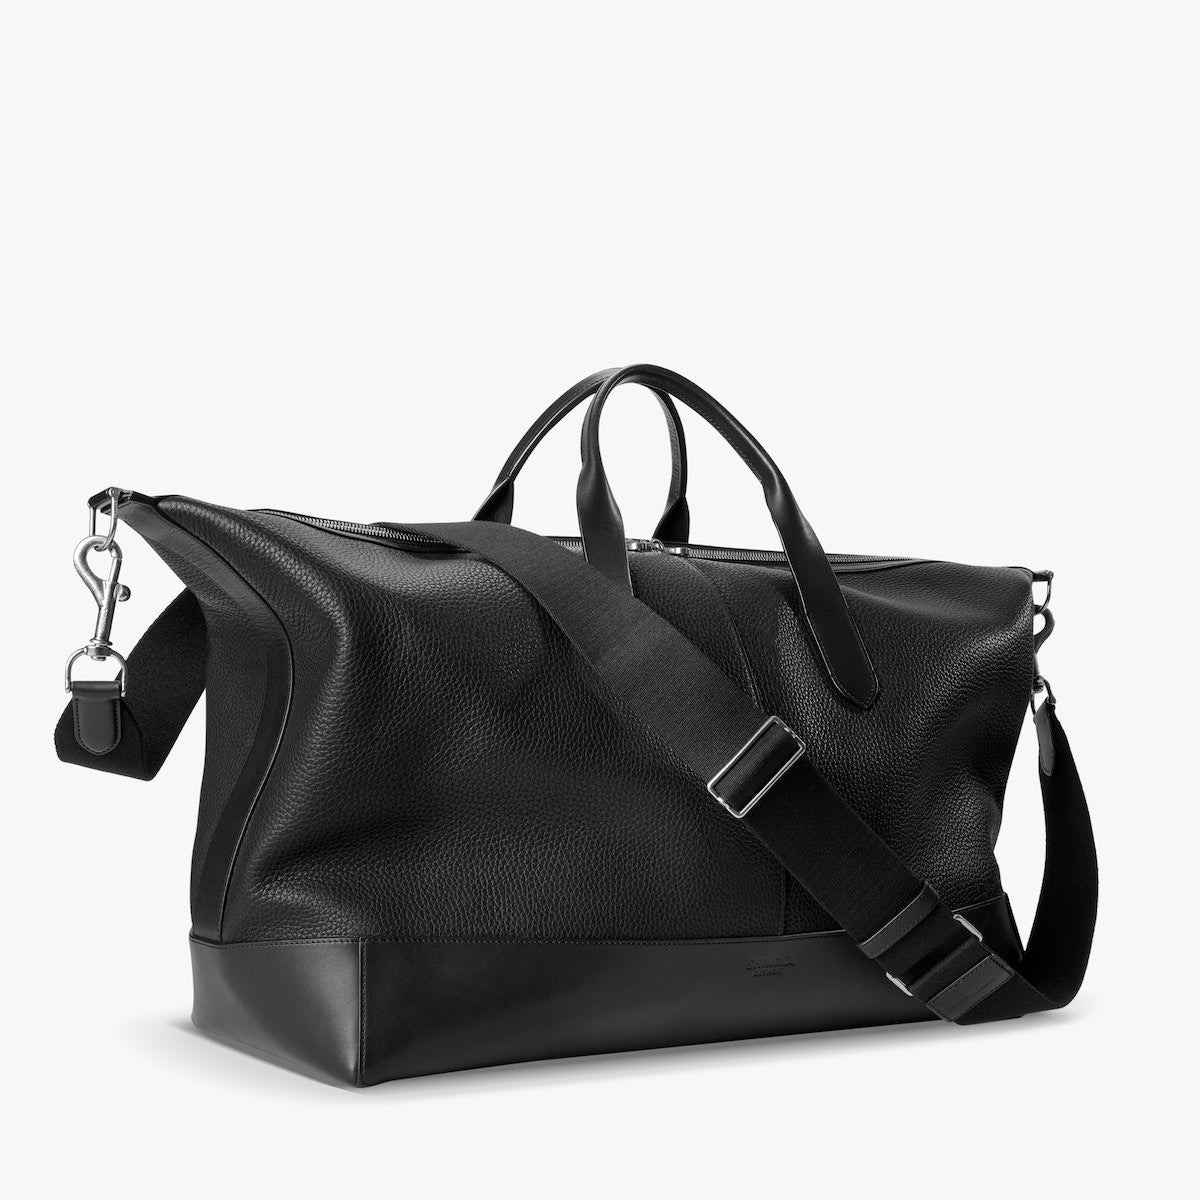 CANFIELD CLASSIC HOLDALL - NATURAL GRAIN LEATHER - BLACK